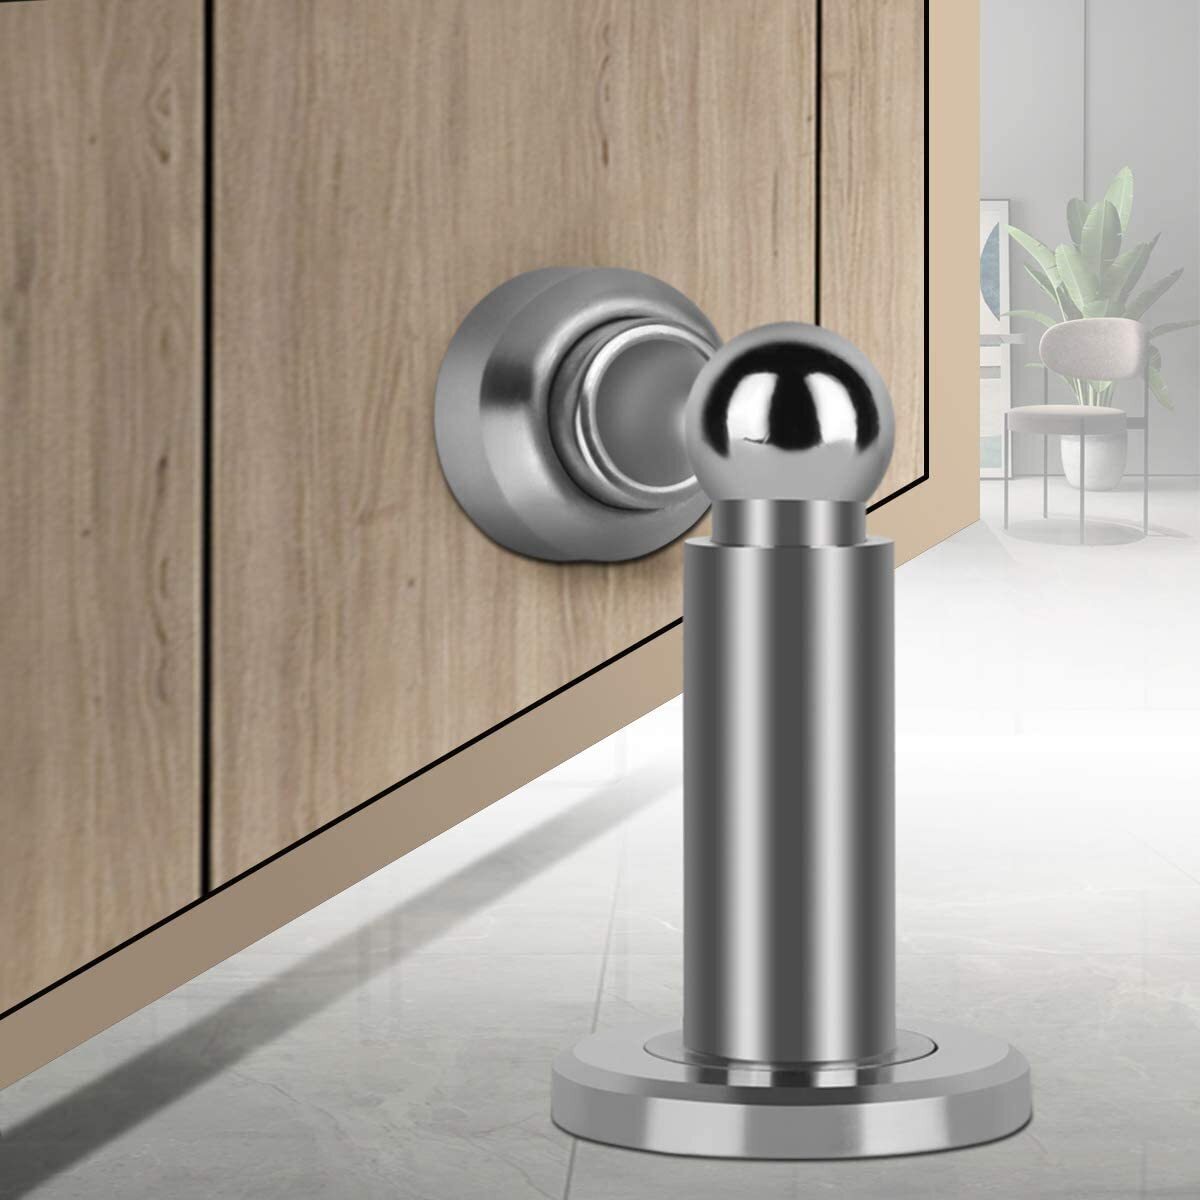 Sleek and Simple Silver Magnetic Door Stopper With Adjustable Height 